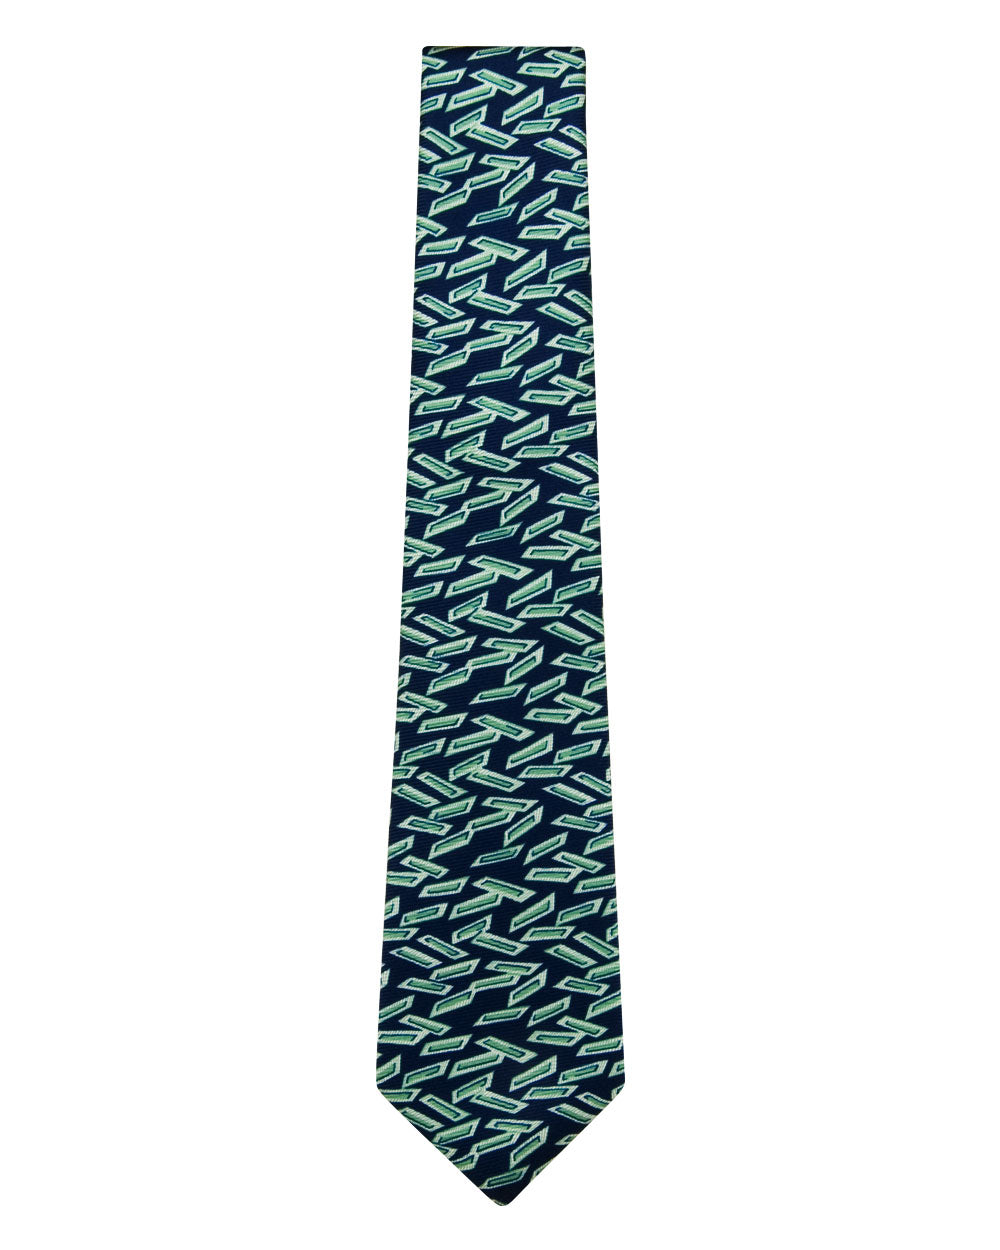 Teal and Navy Slices Tie